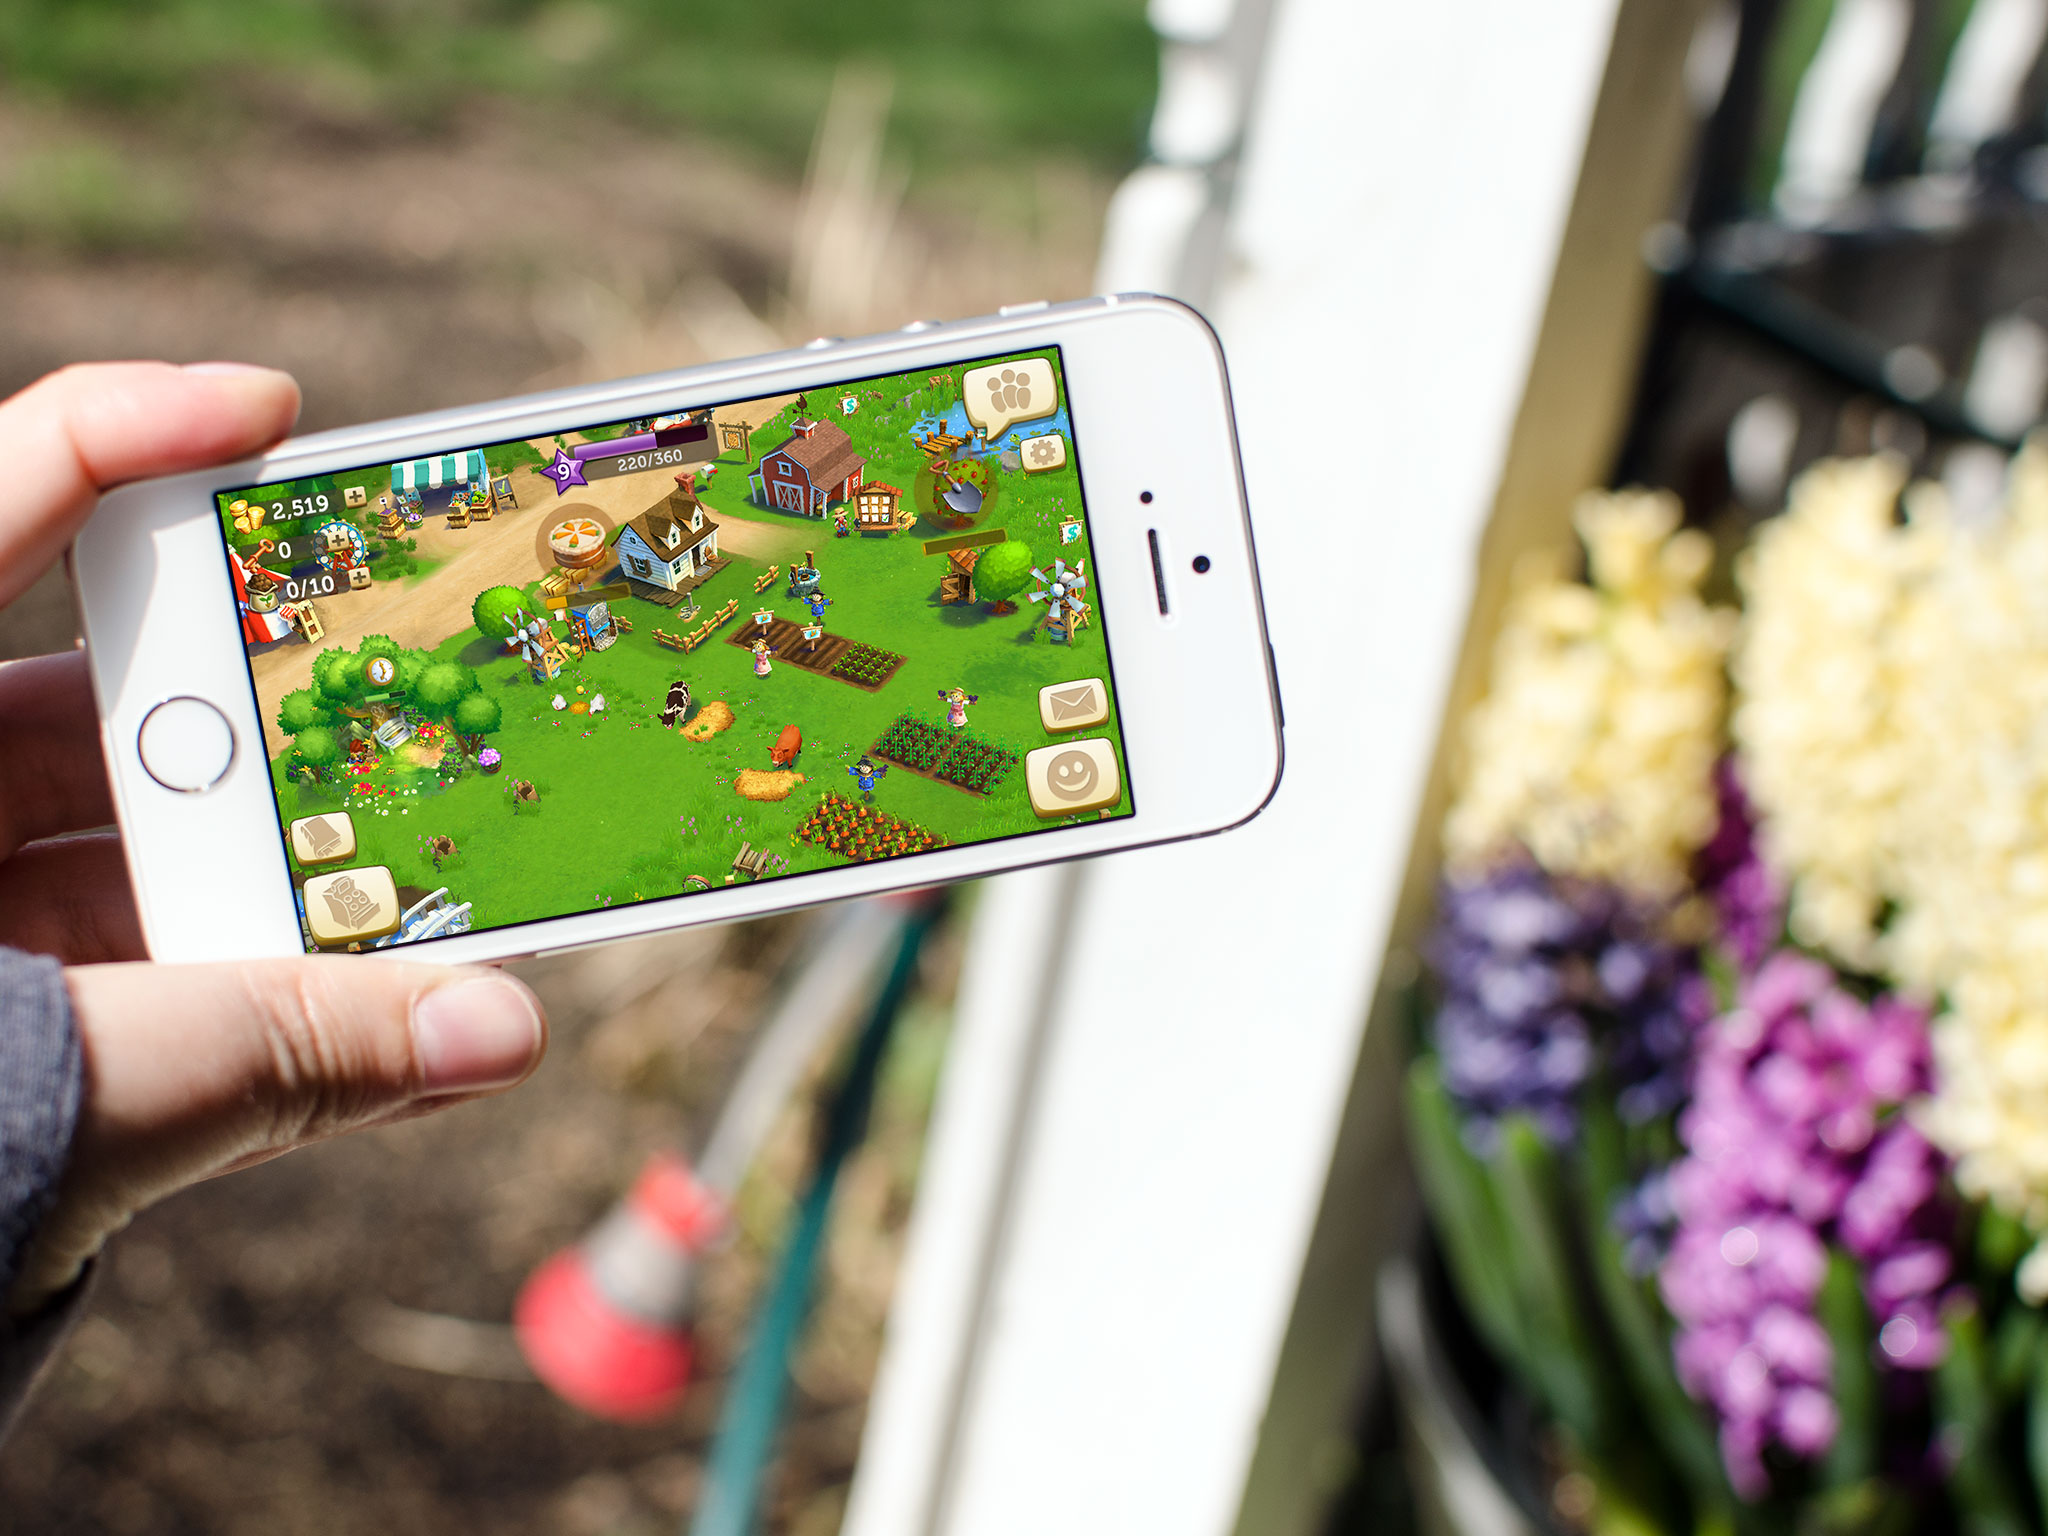 FarmVille 2: Country Escape Game Updated In Windows Store With New